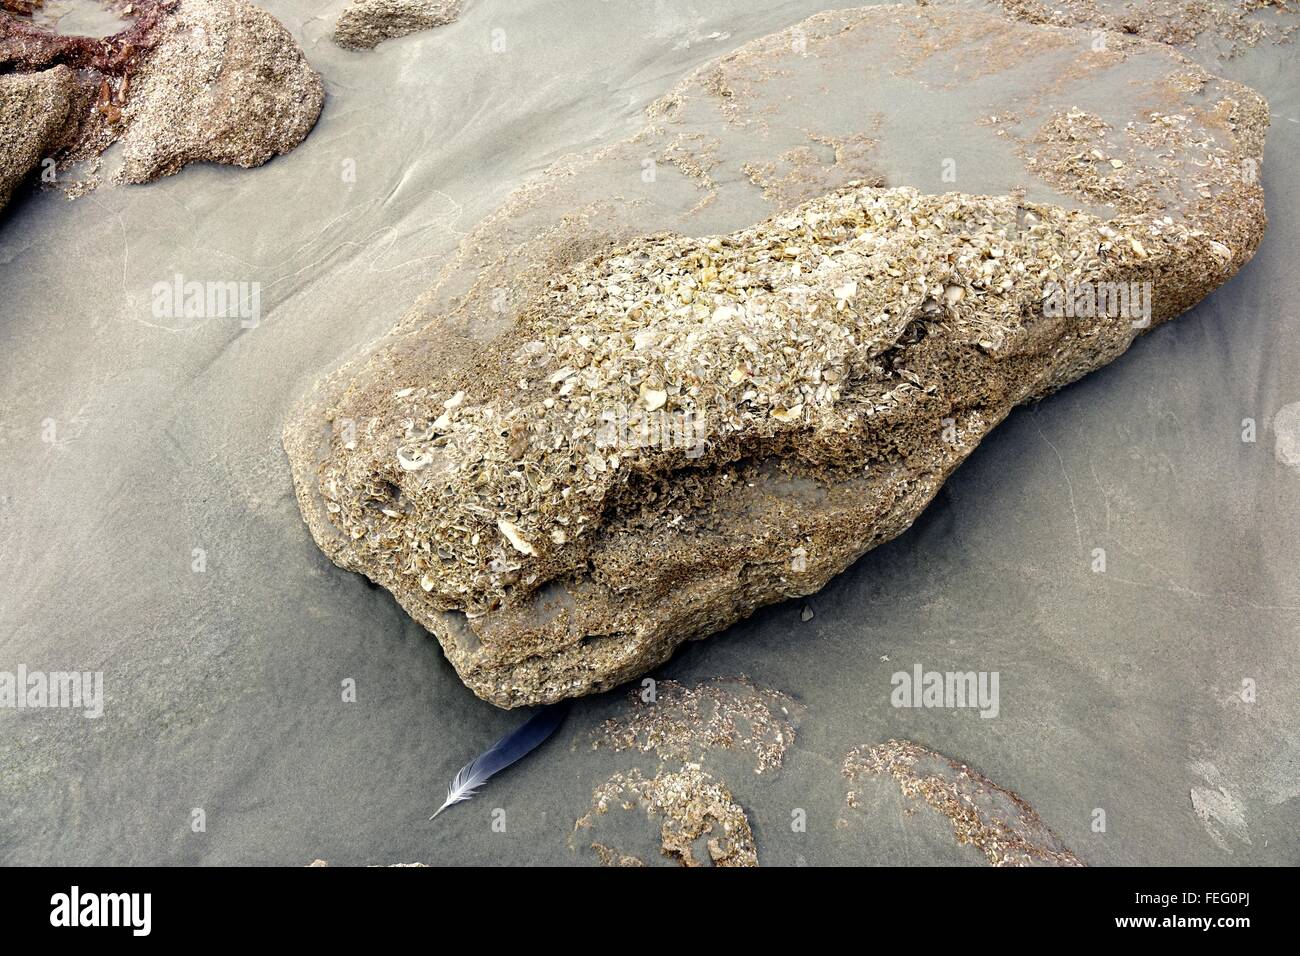 Coquina rocks on beach, Flagler county, Florida, showing sea shells from which the rock is formed Stock Photo